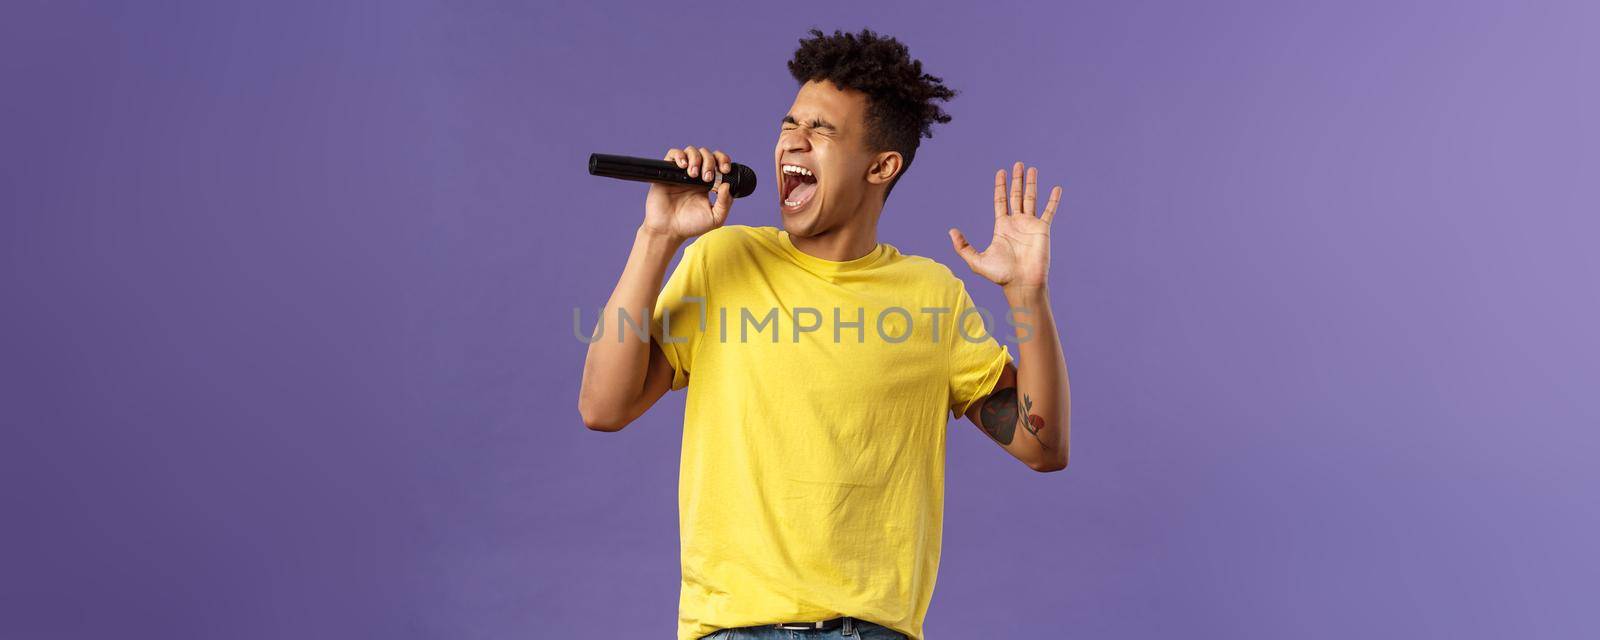 Portrait of passionate carefree young hispanic singer with dreads and tattoos, reaching highest note in song, raising hand up singing loud at microphone with closed eyes, purple background by Benzoix